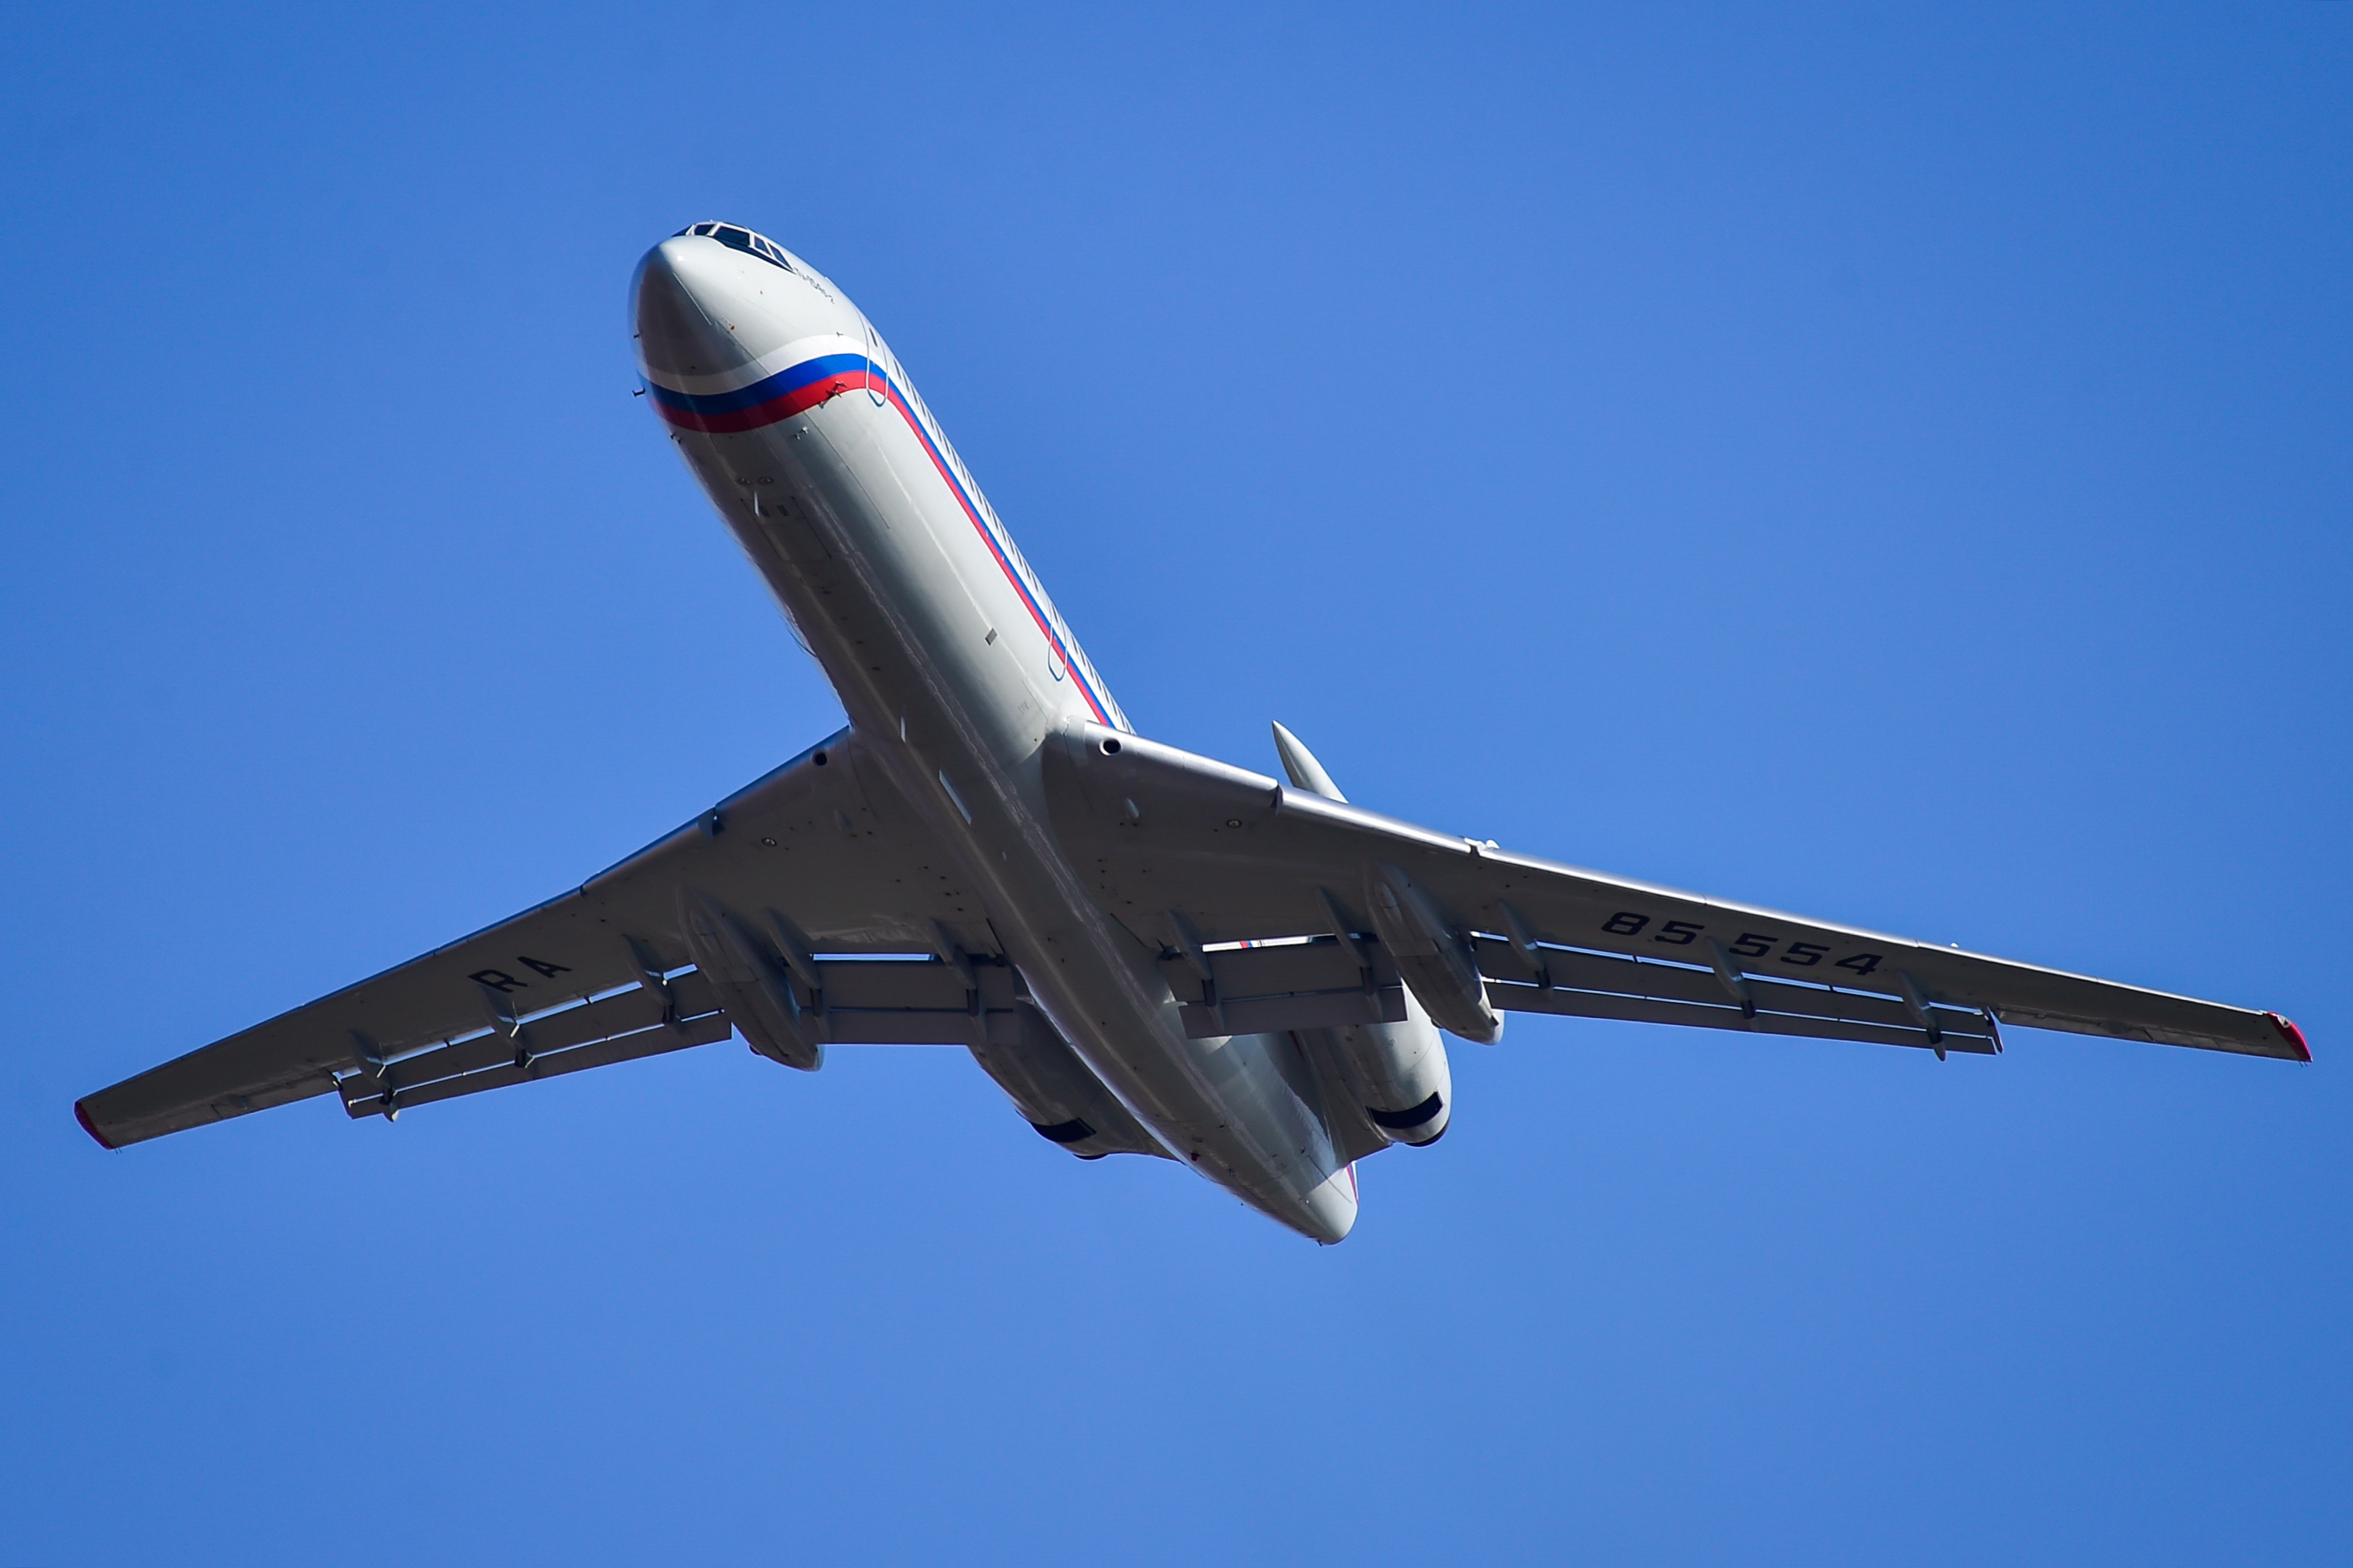 A Russian Tupolev Tu-154 (like the above) was spotted flying across the Midwestern U.S. this week as part of the Open Skies Treaty, which allows nations to make surveillance flights that are declared in advance. (Yuri Smityuk&mdash;TASS via Getty Images)